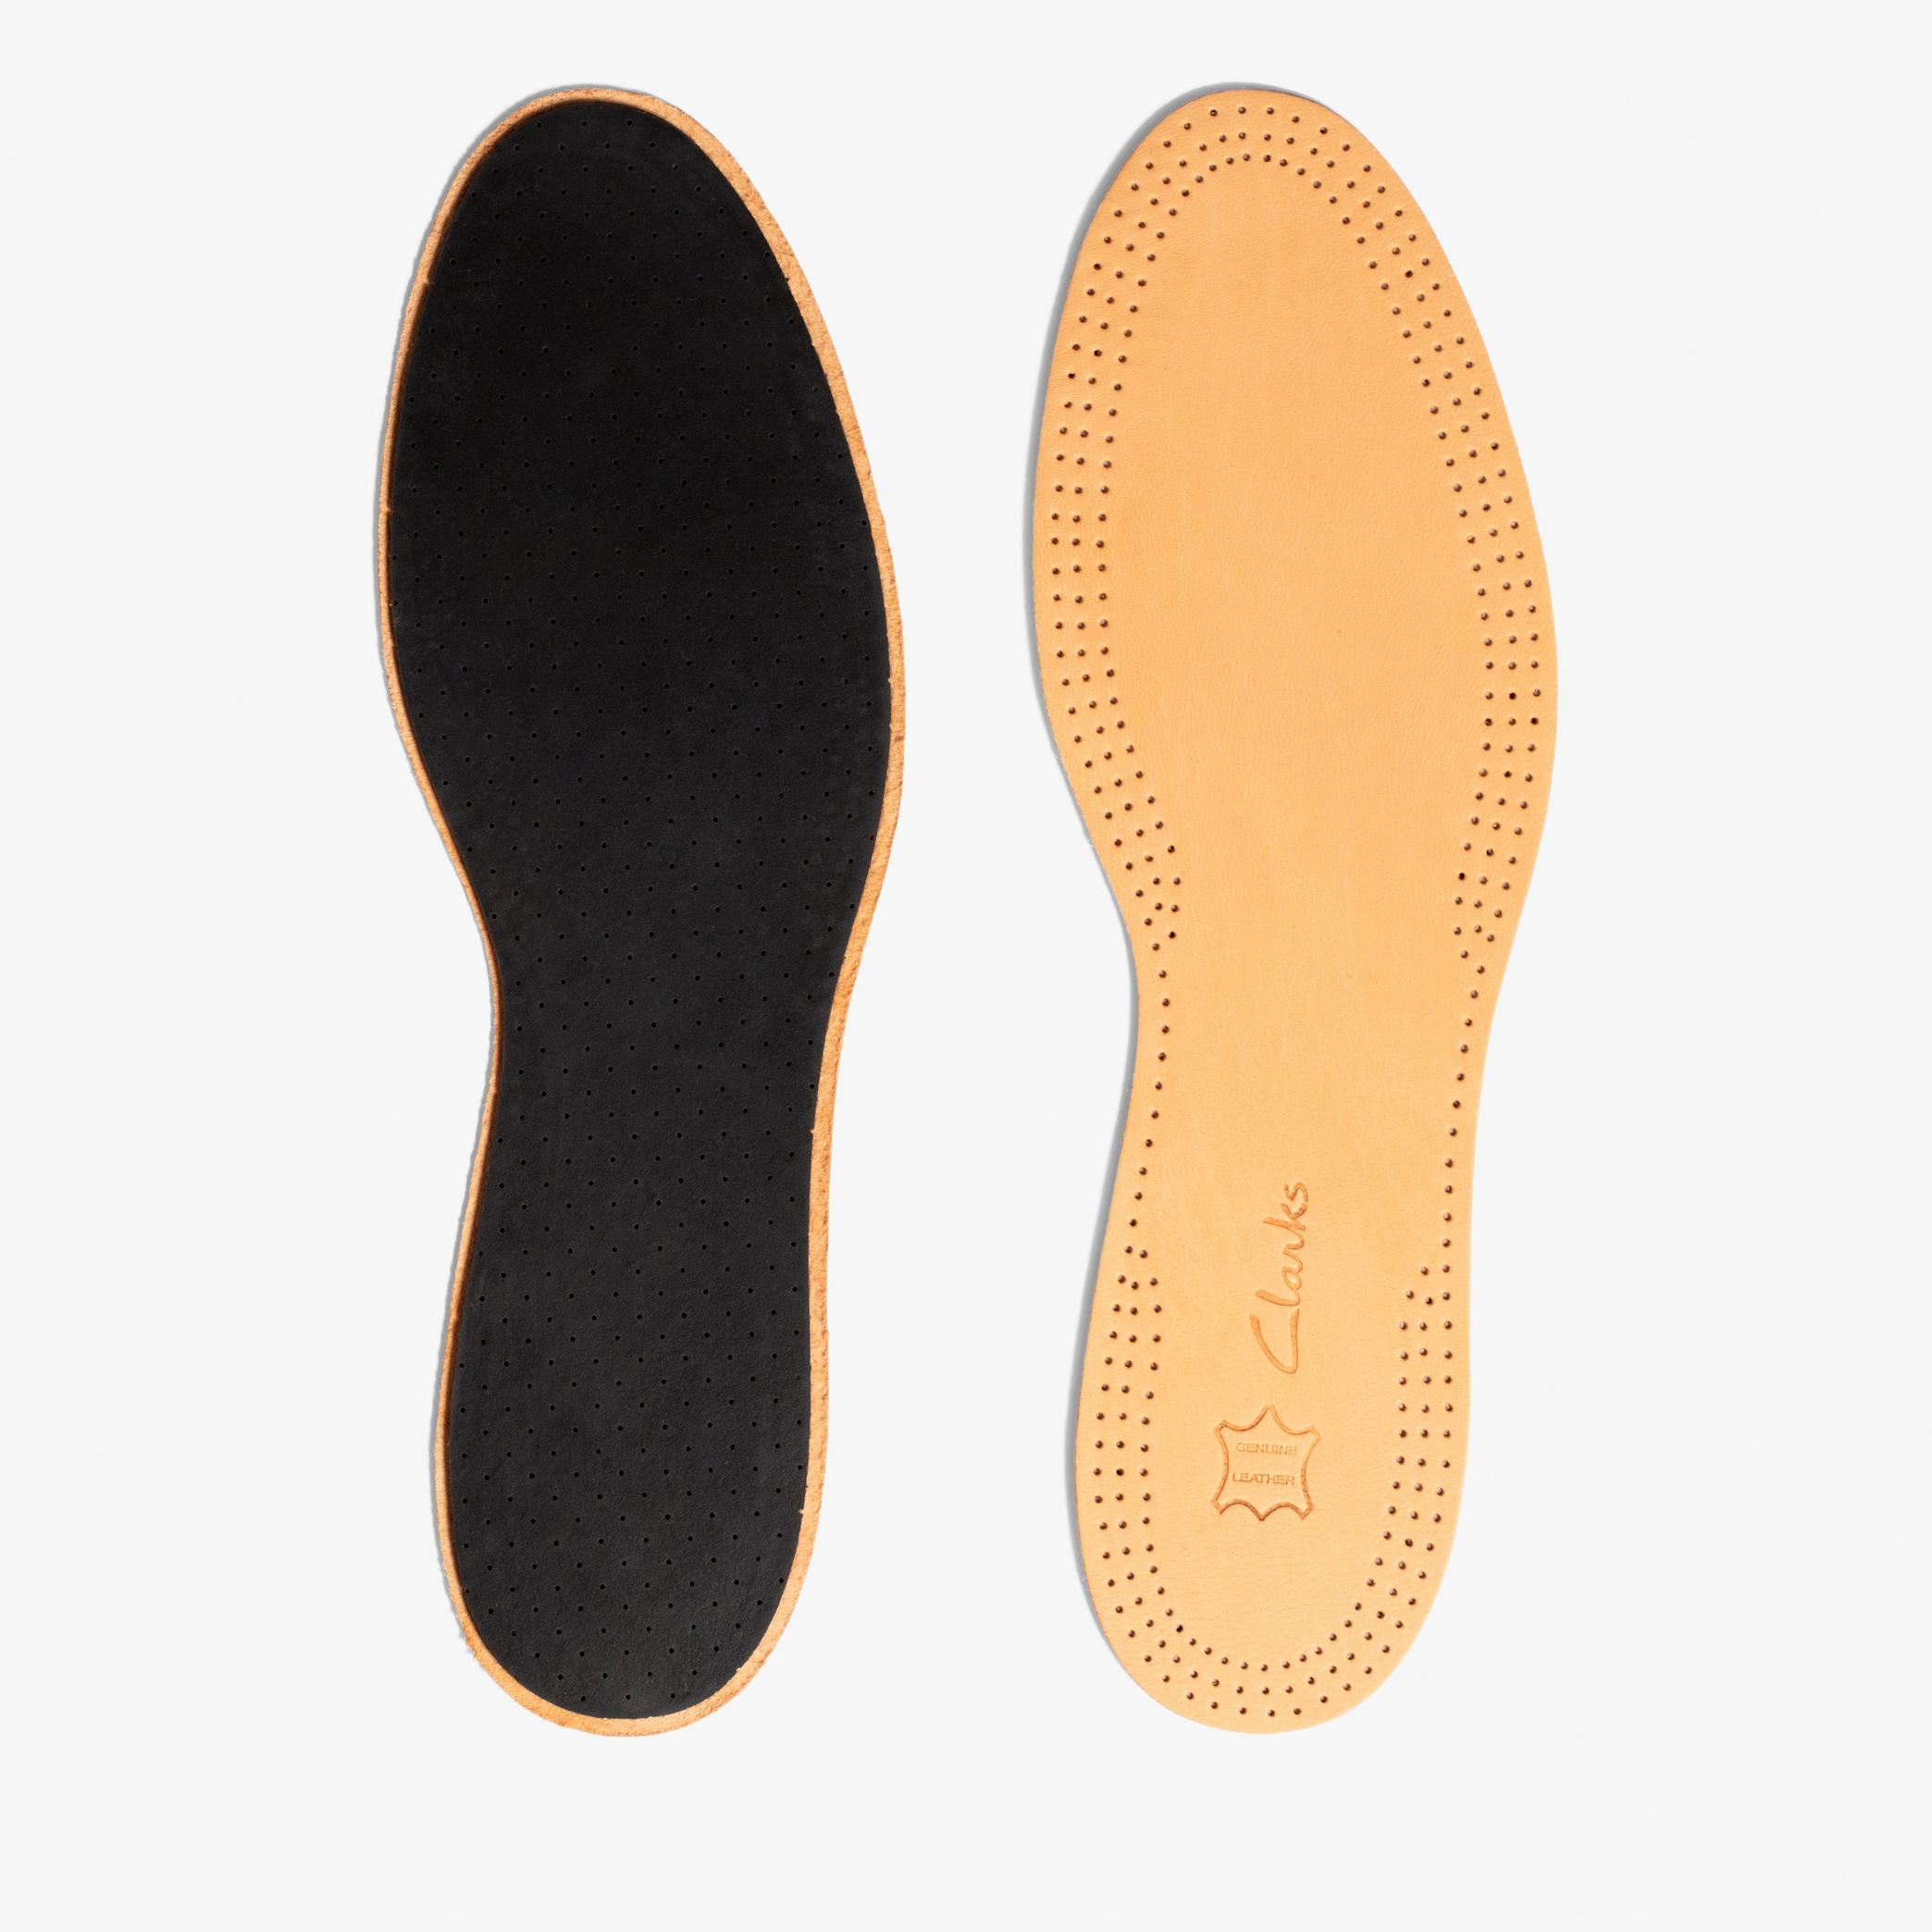 Leather insole size 7  Insoles, view 2 of 3